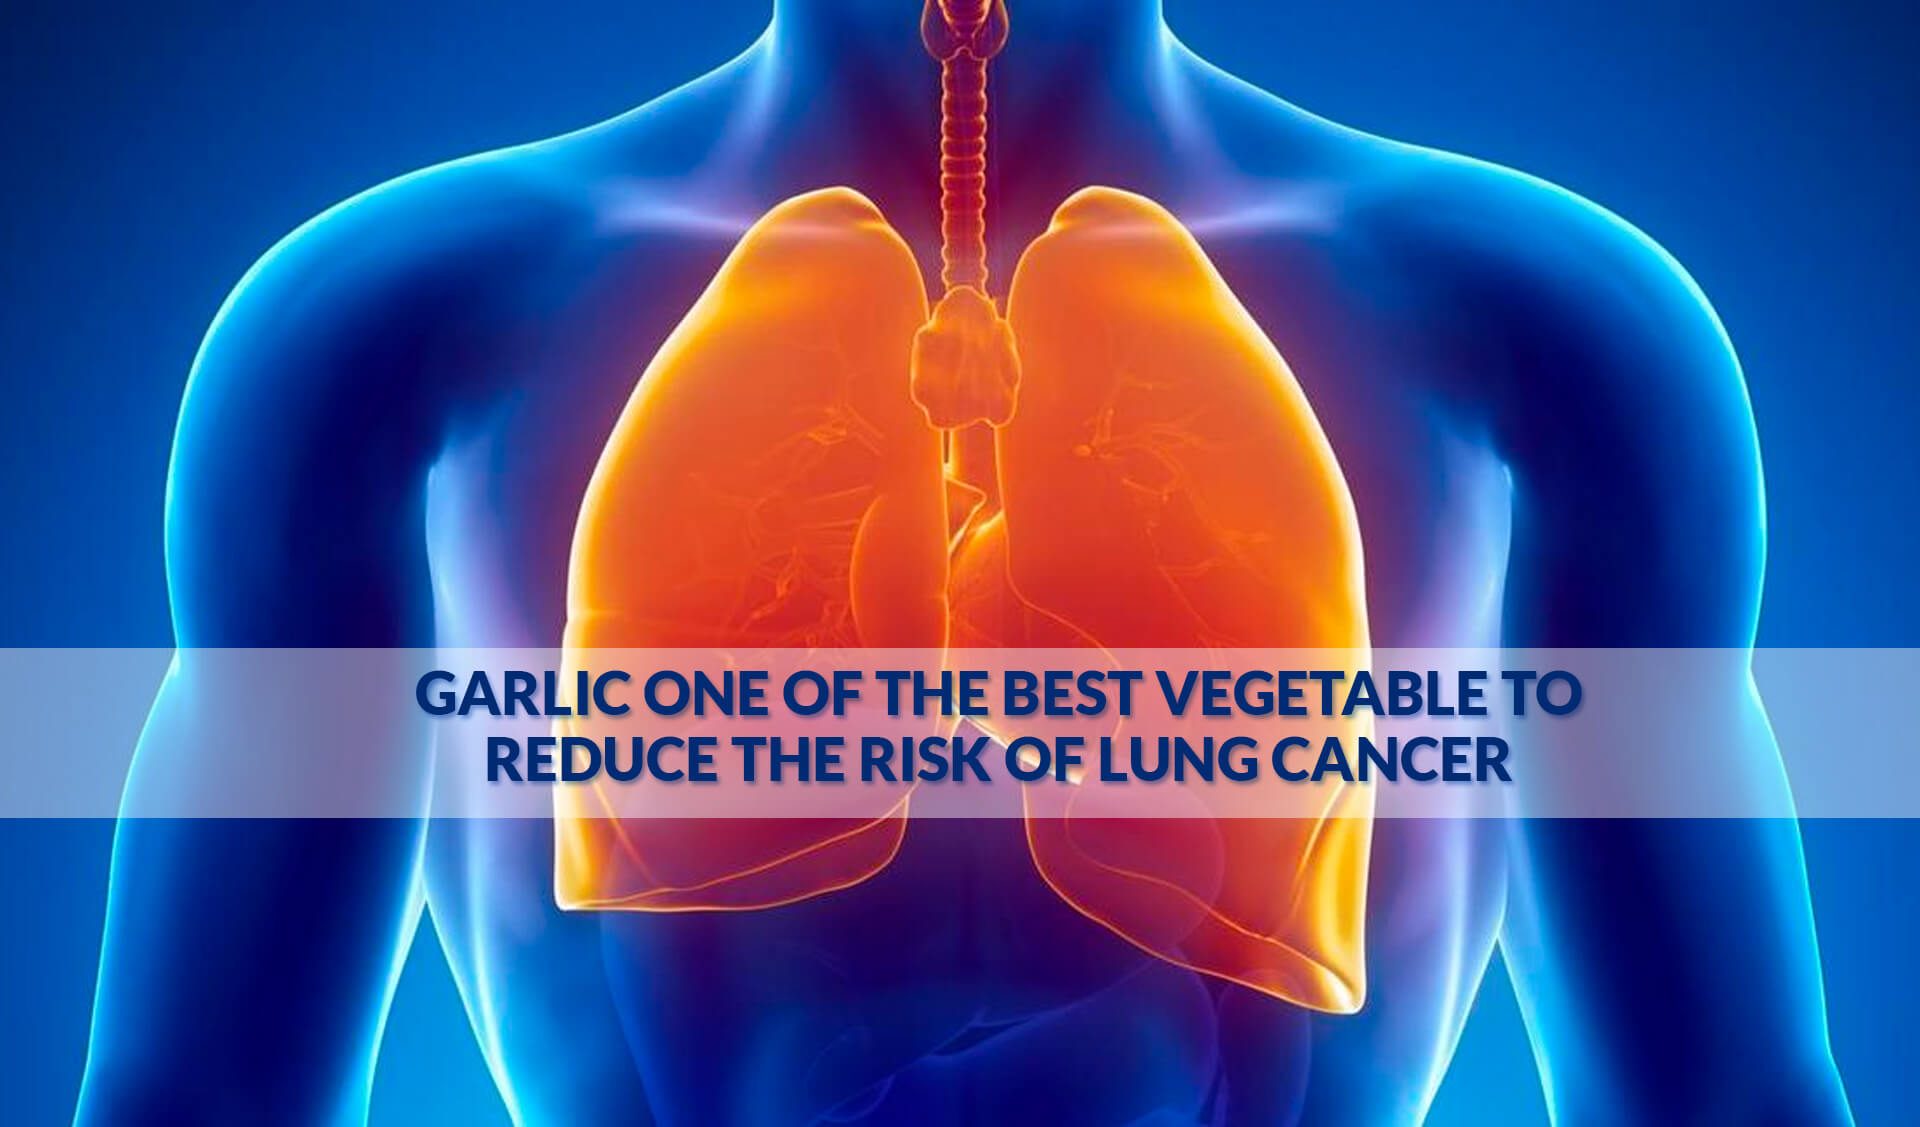 Garlic One Of The Best vegetable To Reduce The Risk Of Lung Cancer